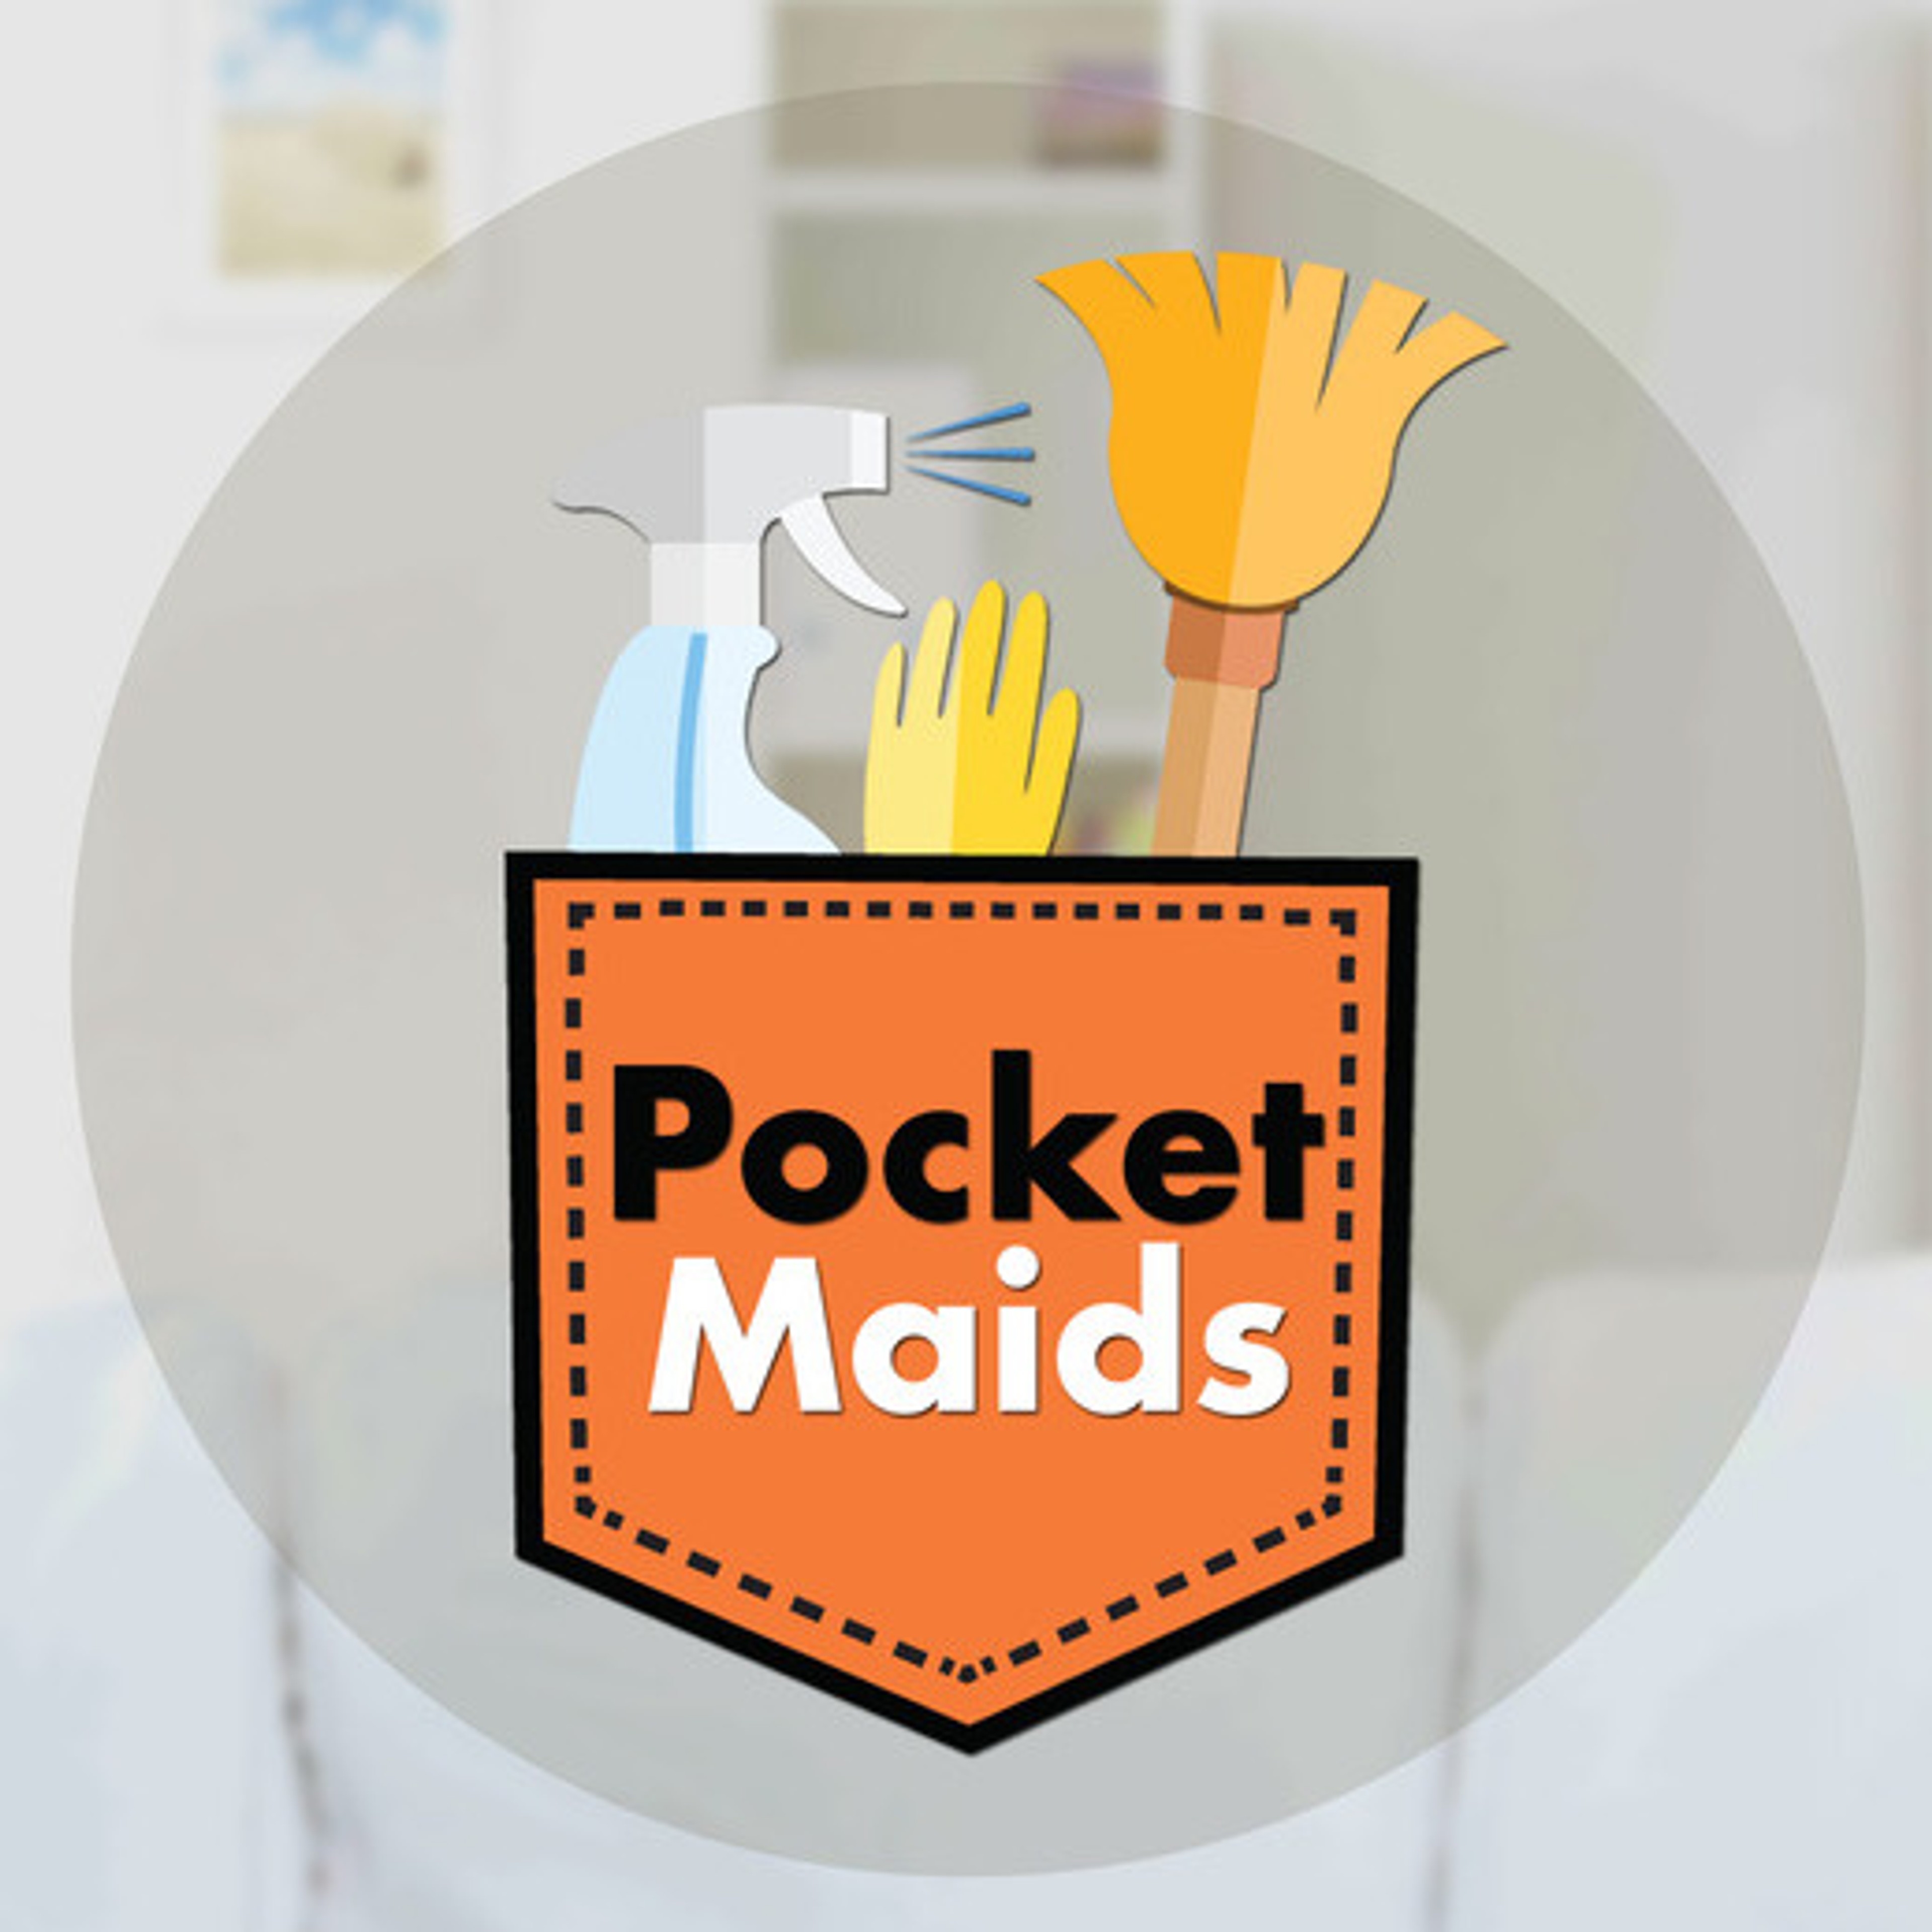 Owner of Pocket Maids - Home Cleaning Services